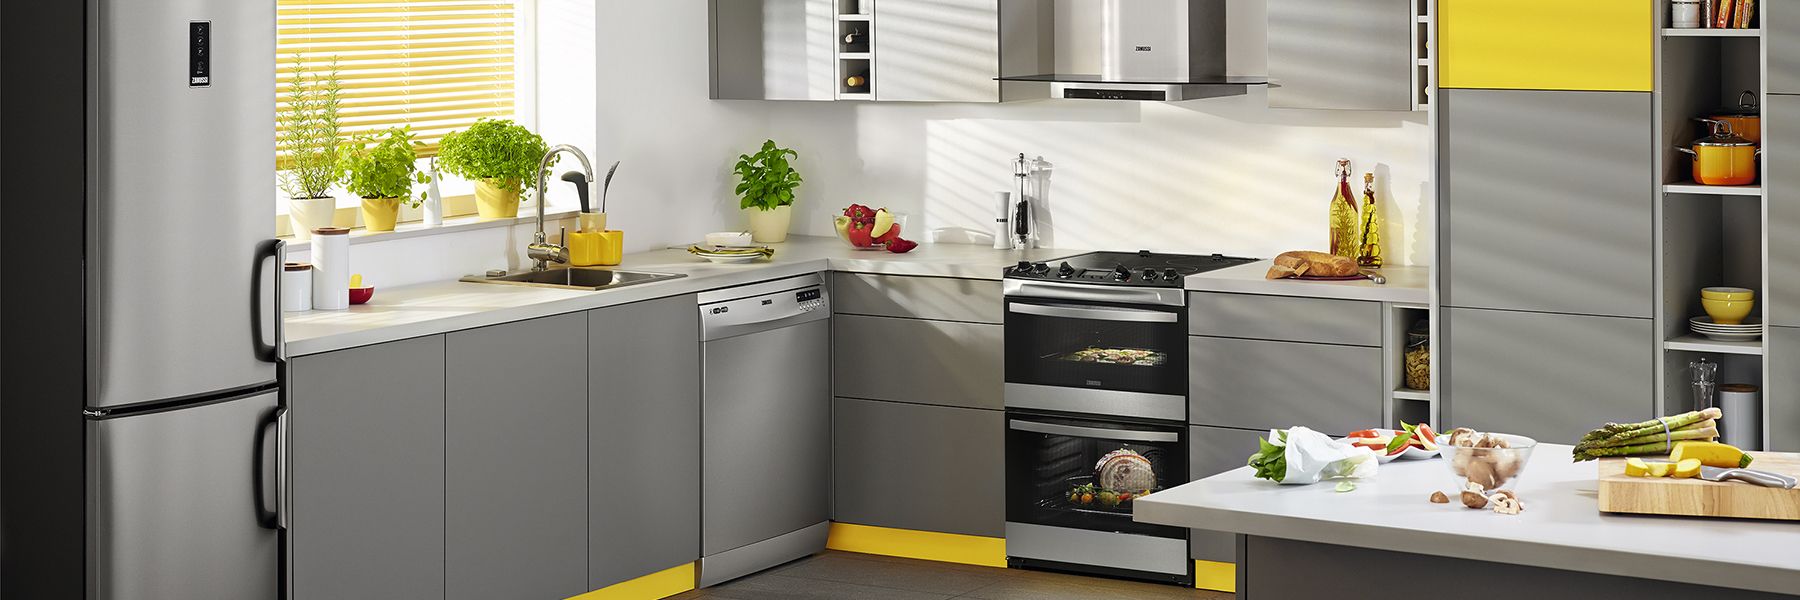 a freestanding cooker installed in a kitchen